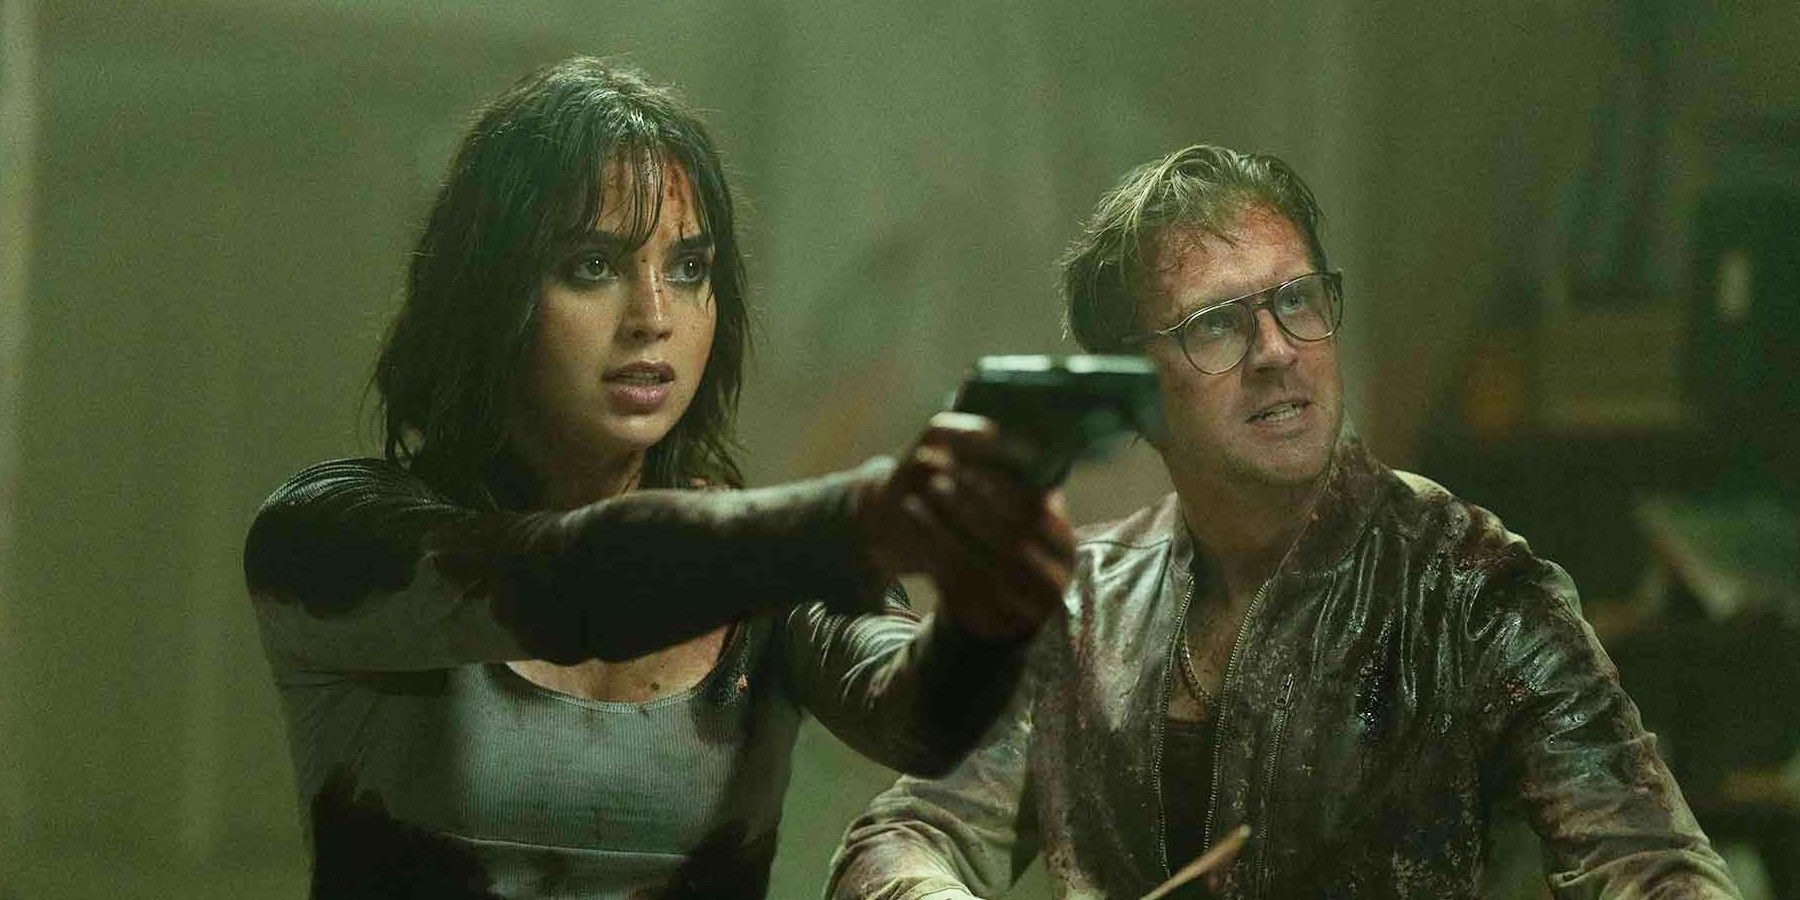 Casting Lara Croft For Amazon's Live-Action Tomb Raider: 10 Actors Who'd Be Perfect